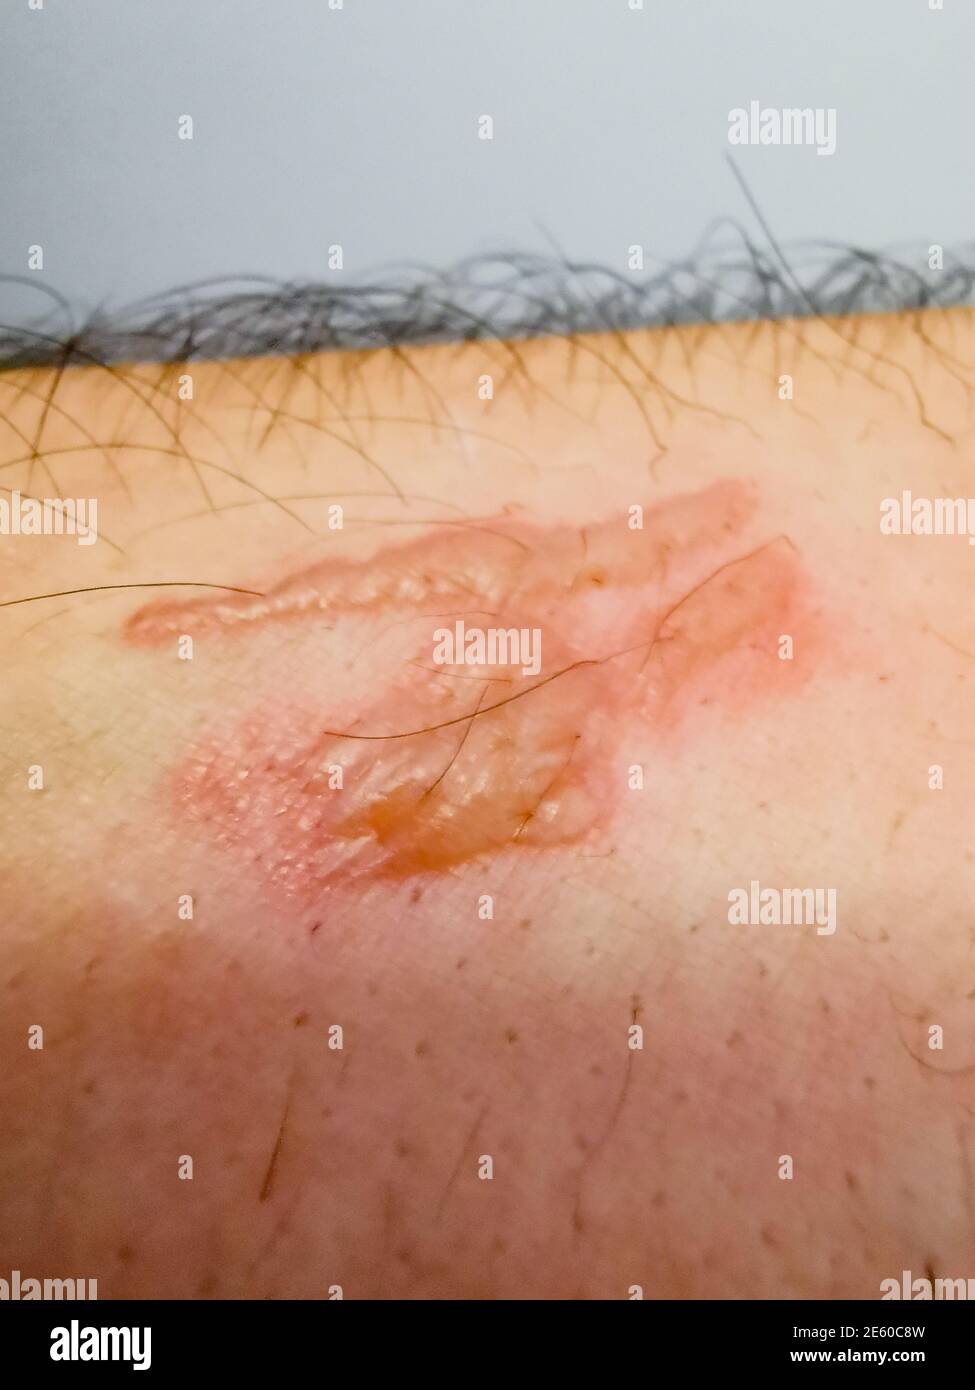 Image of an ugly burn scar on the forearm of a man Stock Photo